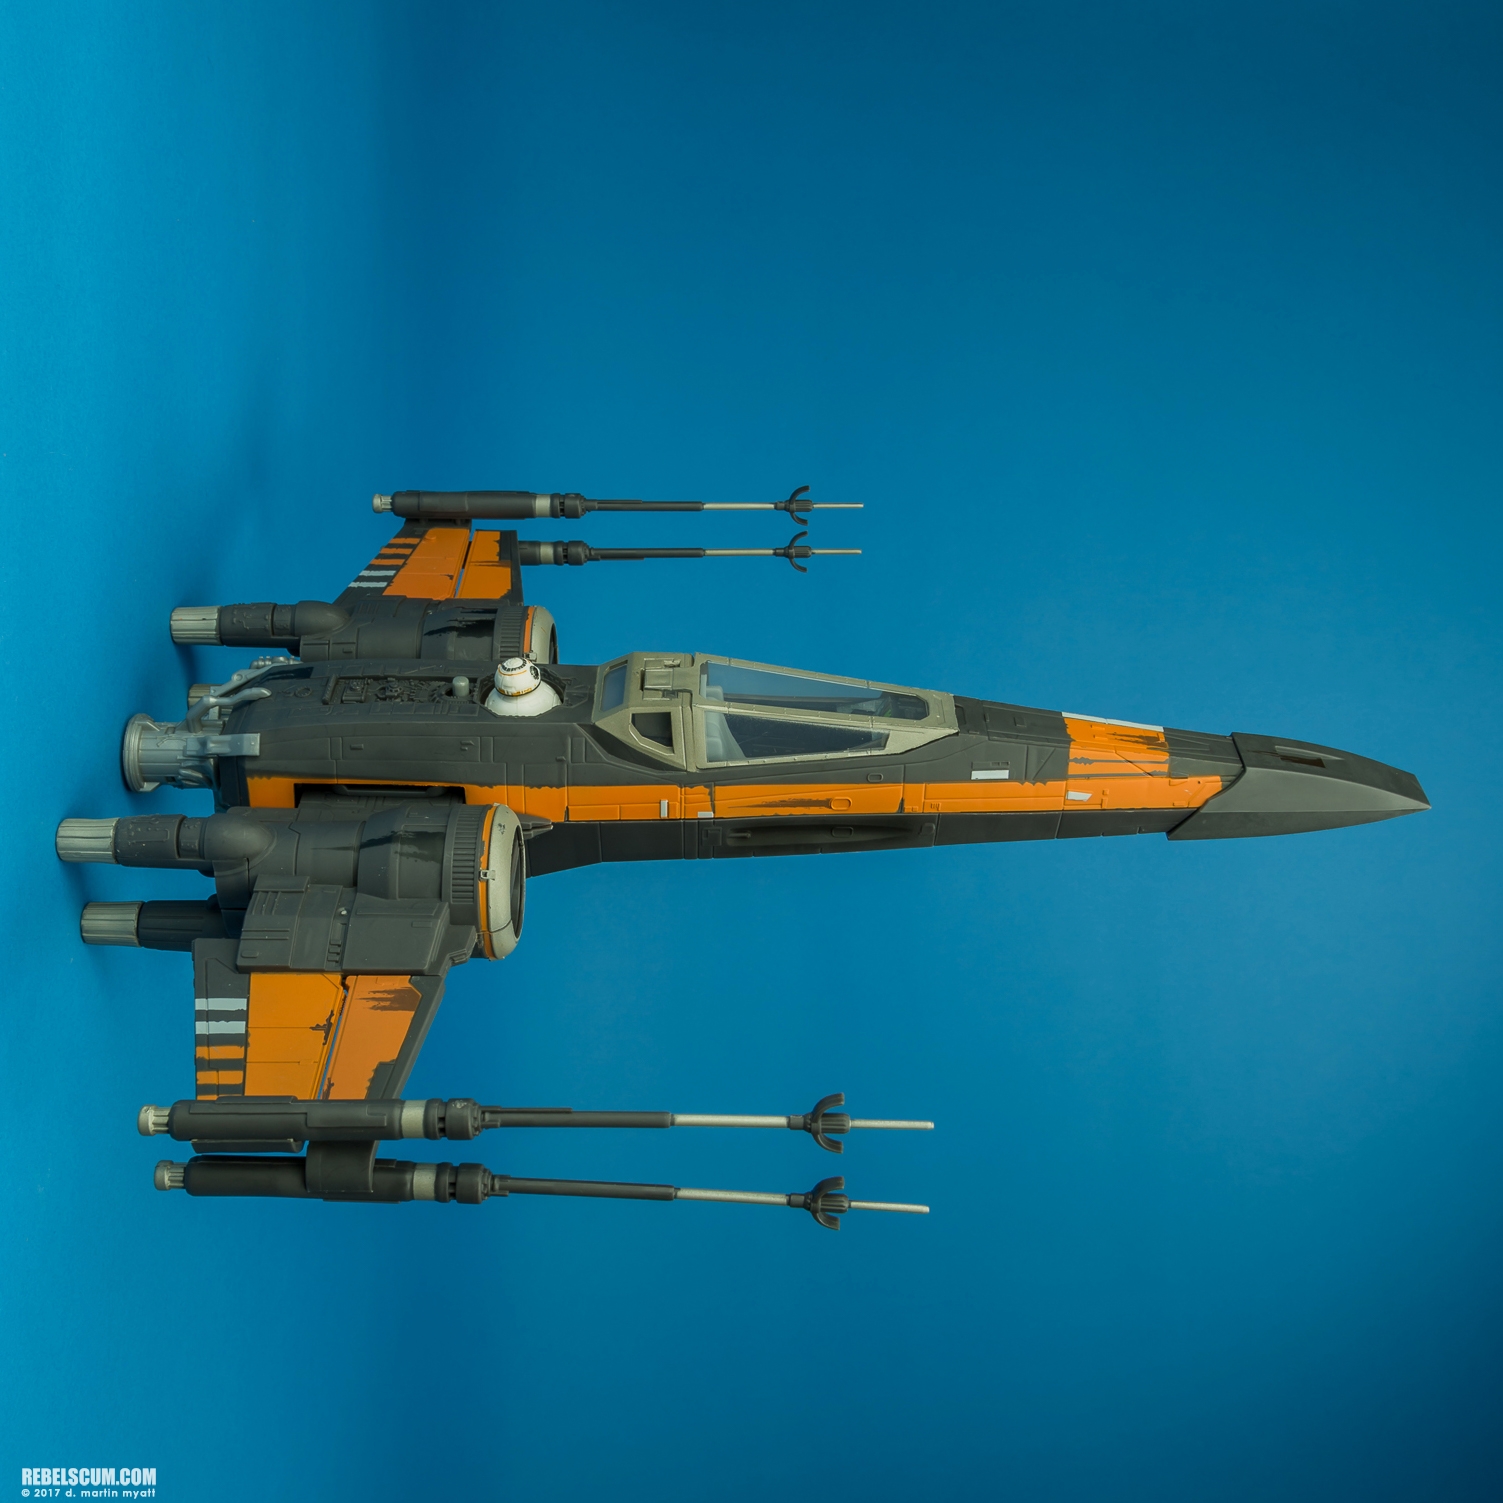 Poes-Boosted-X-Wing-Fighter-The-Last-Jedi-Hasbro-003.jpg